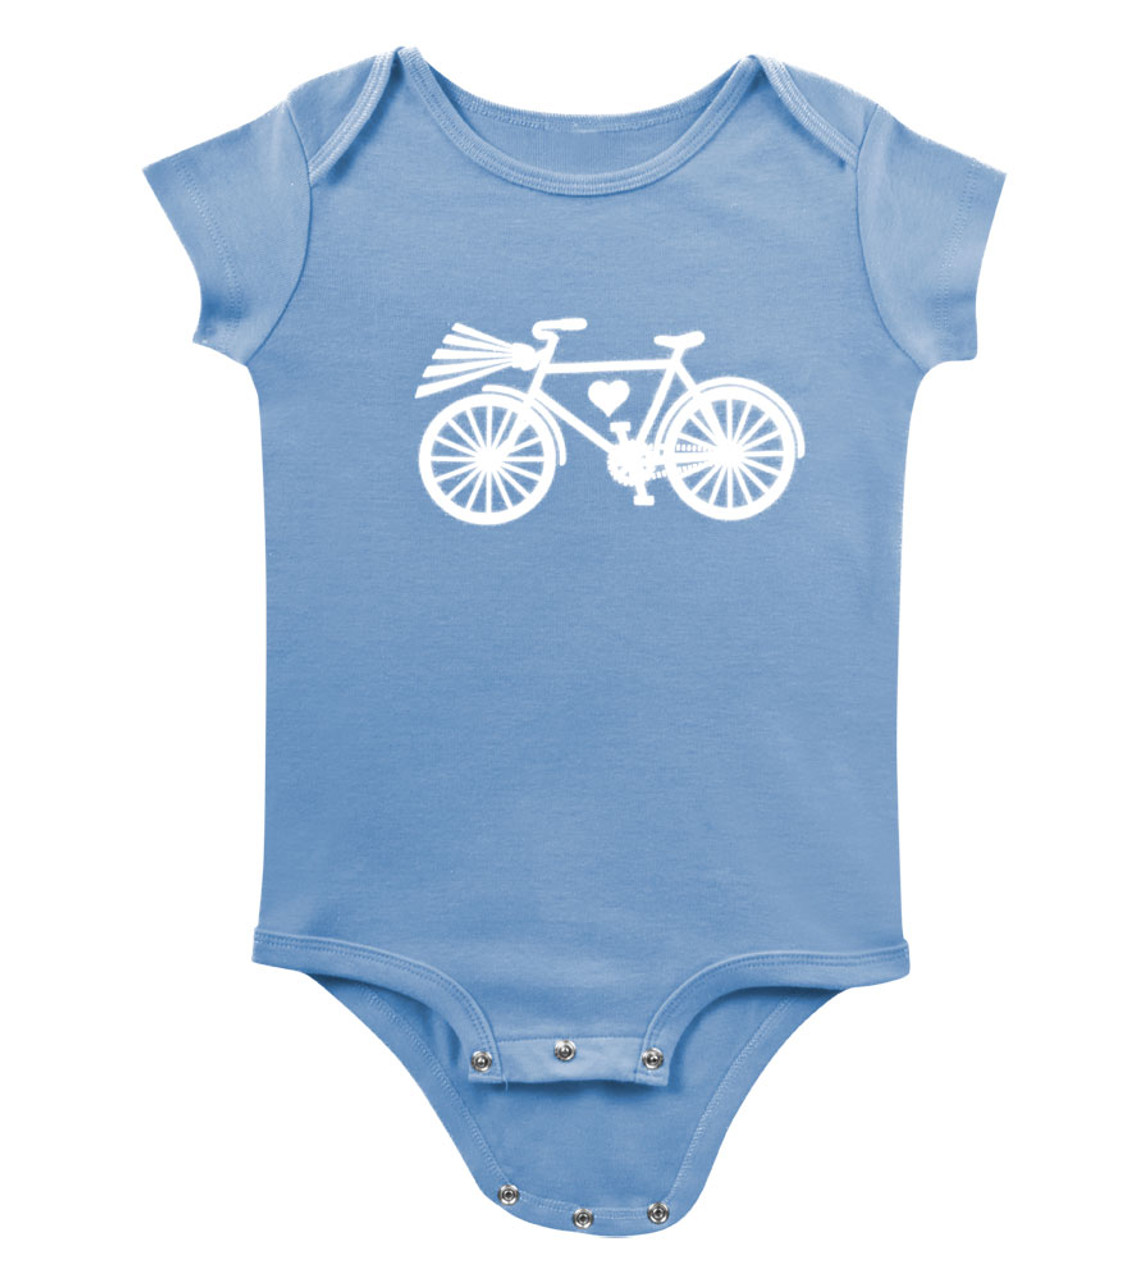 Bike Print Onesie for Infants and Toddlers in 5 Colors and 4 Sizes